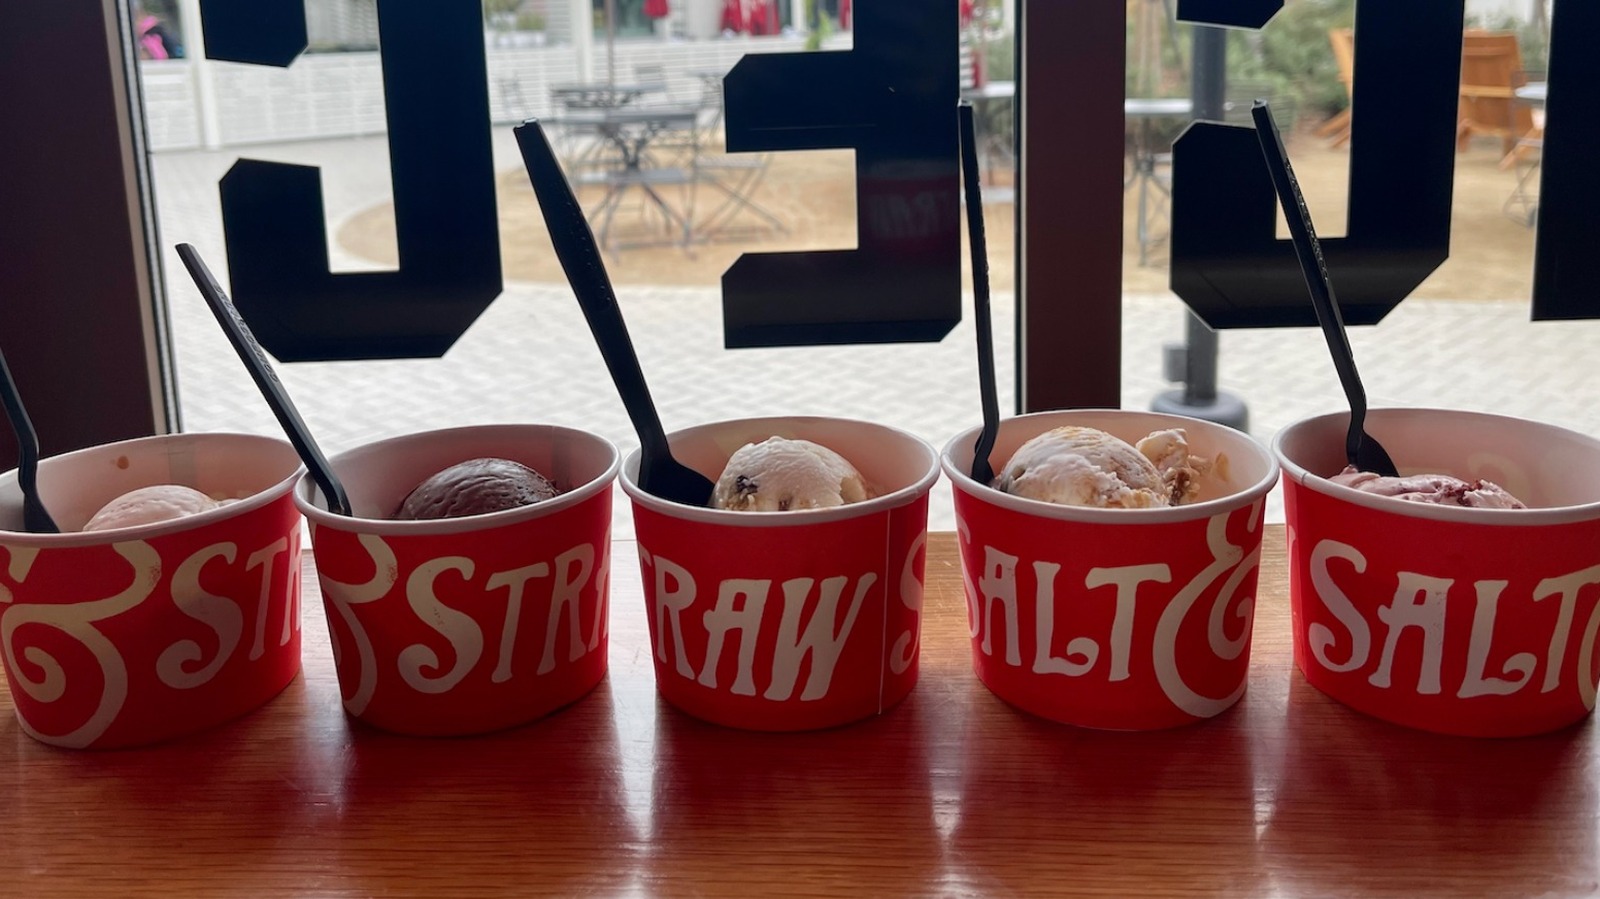 https://www.mashed.com/img/gallery/we-tried-salt-straws-new-lineup-of-dairy-free-ice-cream-flavors-and-found-a-lot-to-like/l-intro-1672531600.jpg